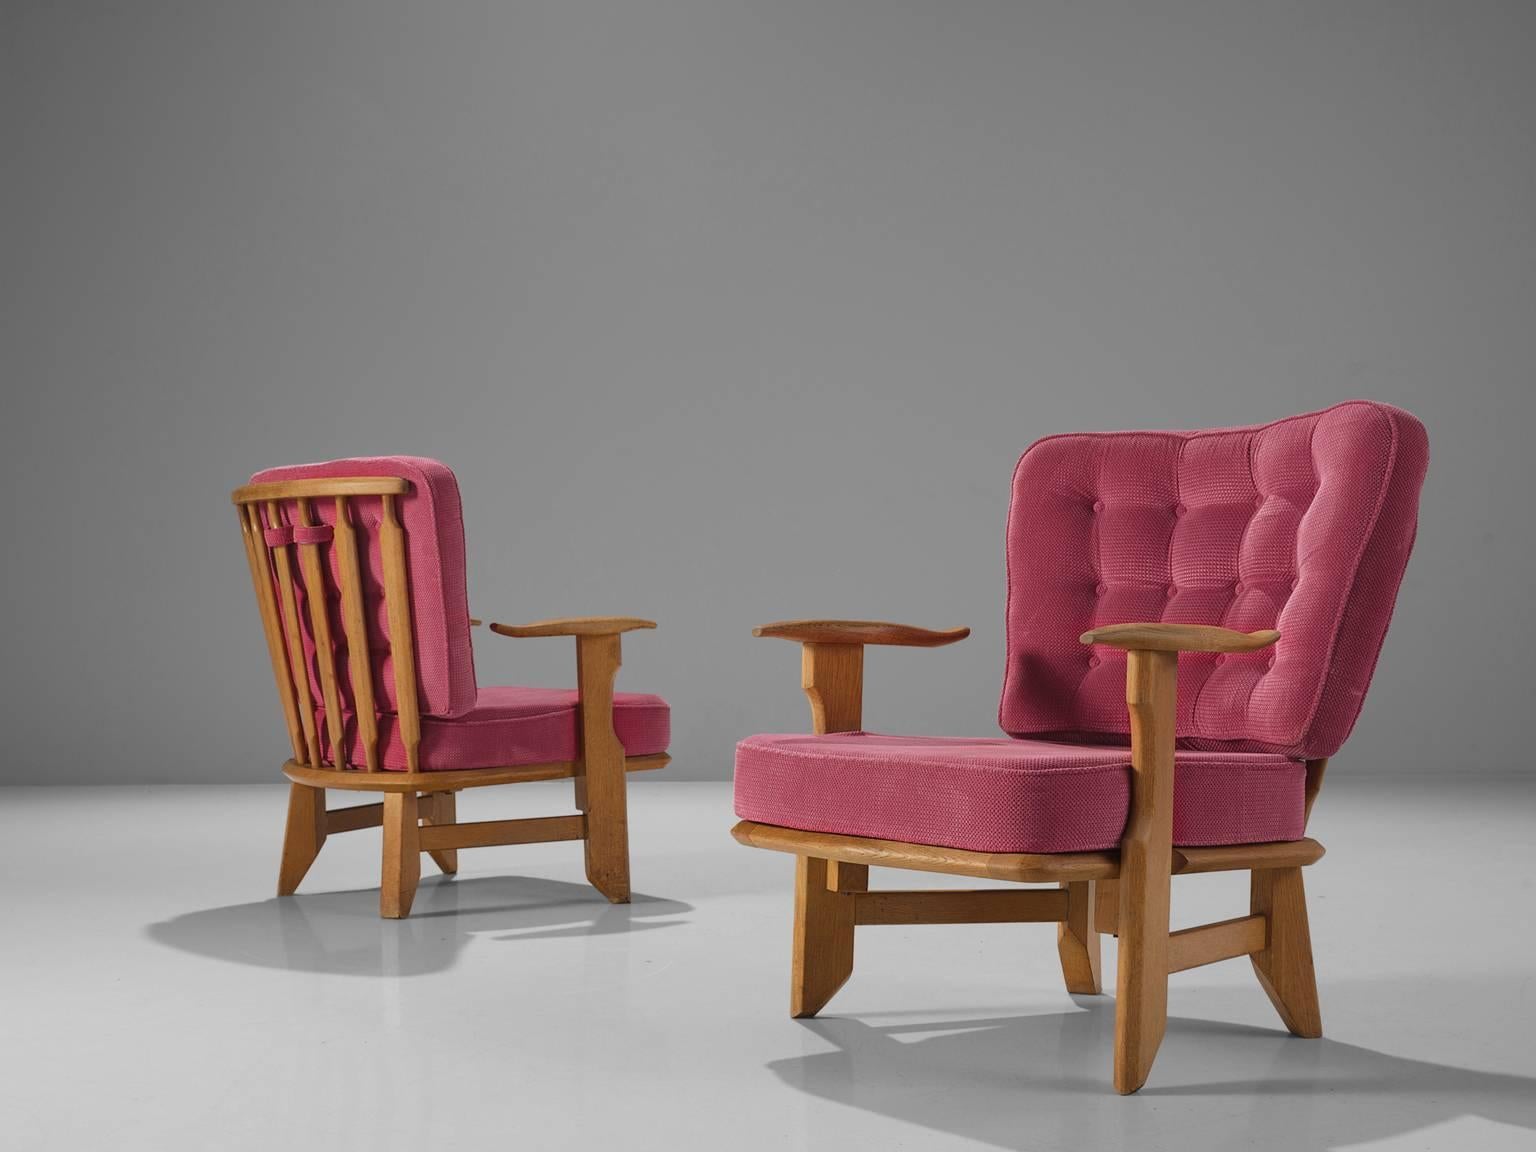 Guillerme and Chambron, pink fabric, oak, rope, France, 1950s

These sculptural easy chairs are designed by Guillerme and Chambron. They are known for their high quality solid oak furniture, off which this is no exception. These comfortable